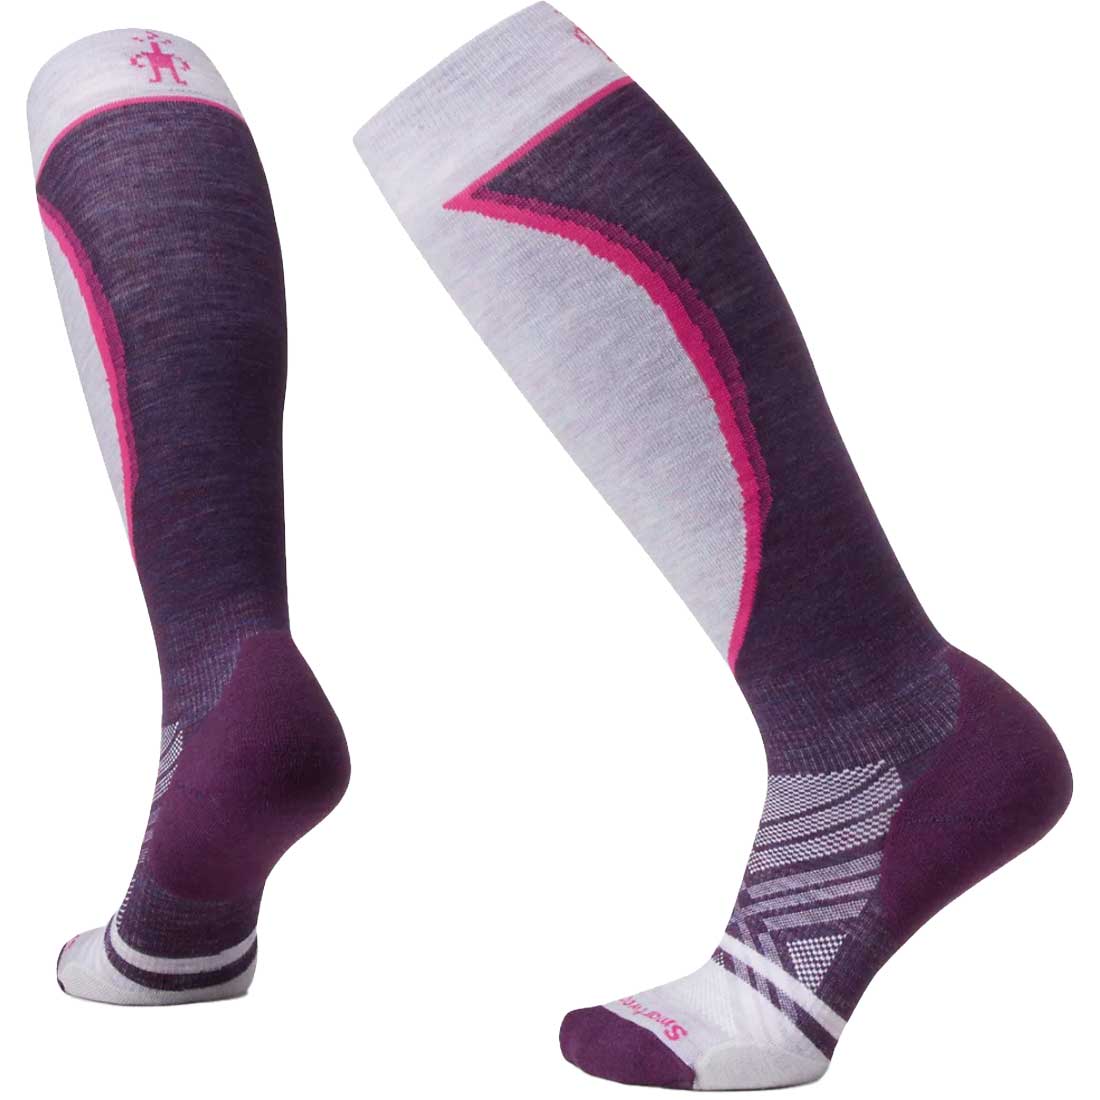 Smartwool Ski Targeted Cushion Extra Stretch Over-the-Calf Sock - Women's